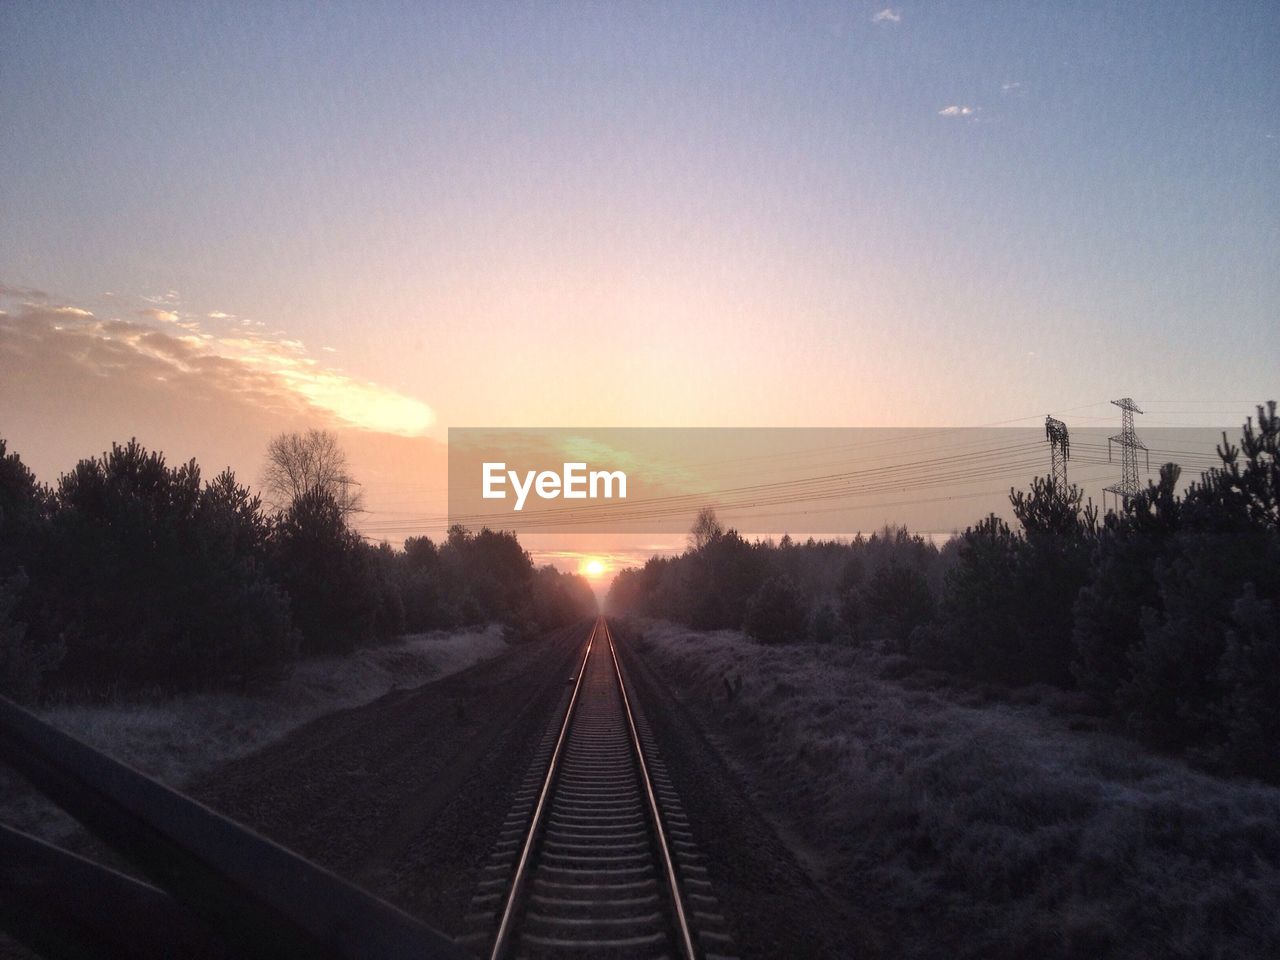 Silhouette trees amidst railroad track seen through train windshield at sunset